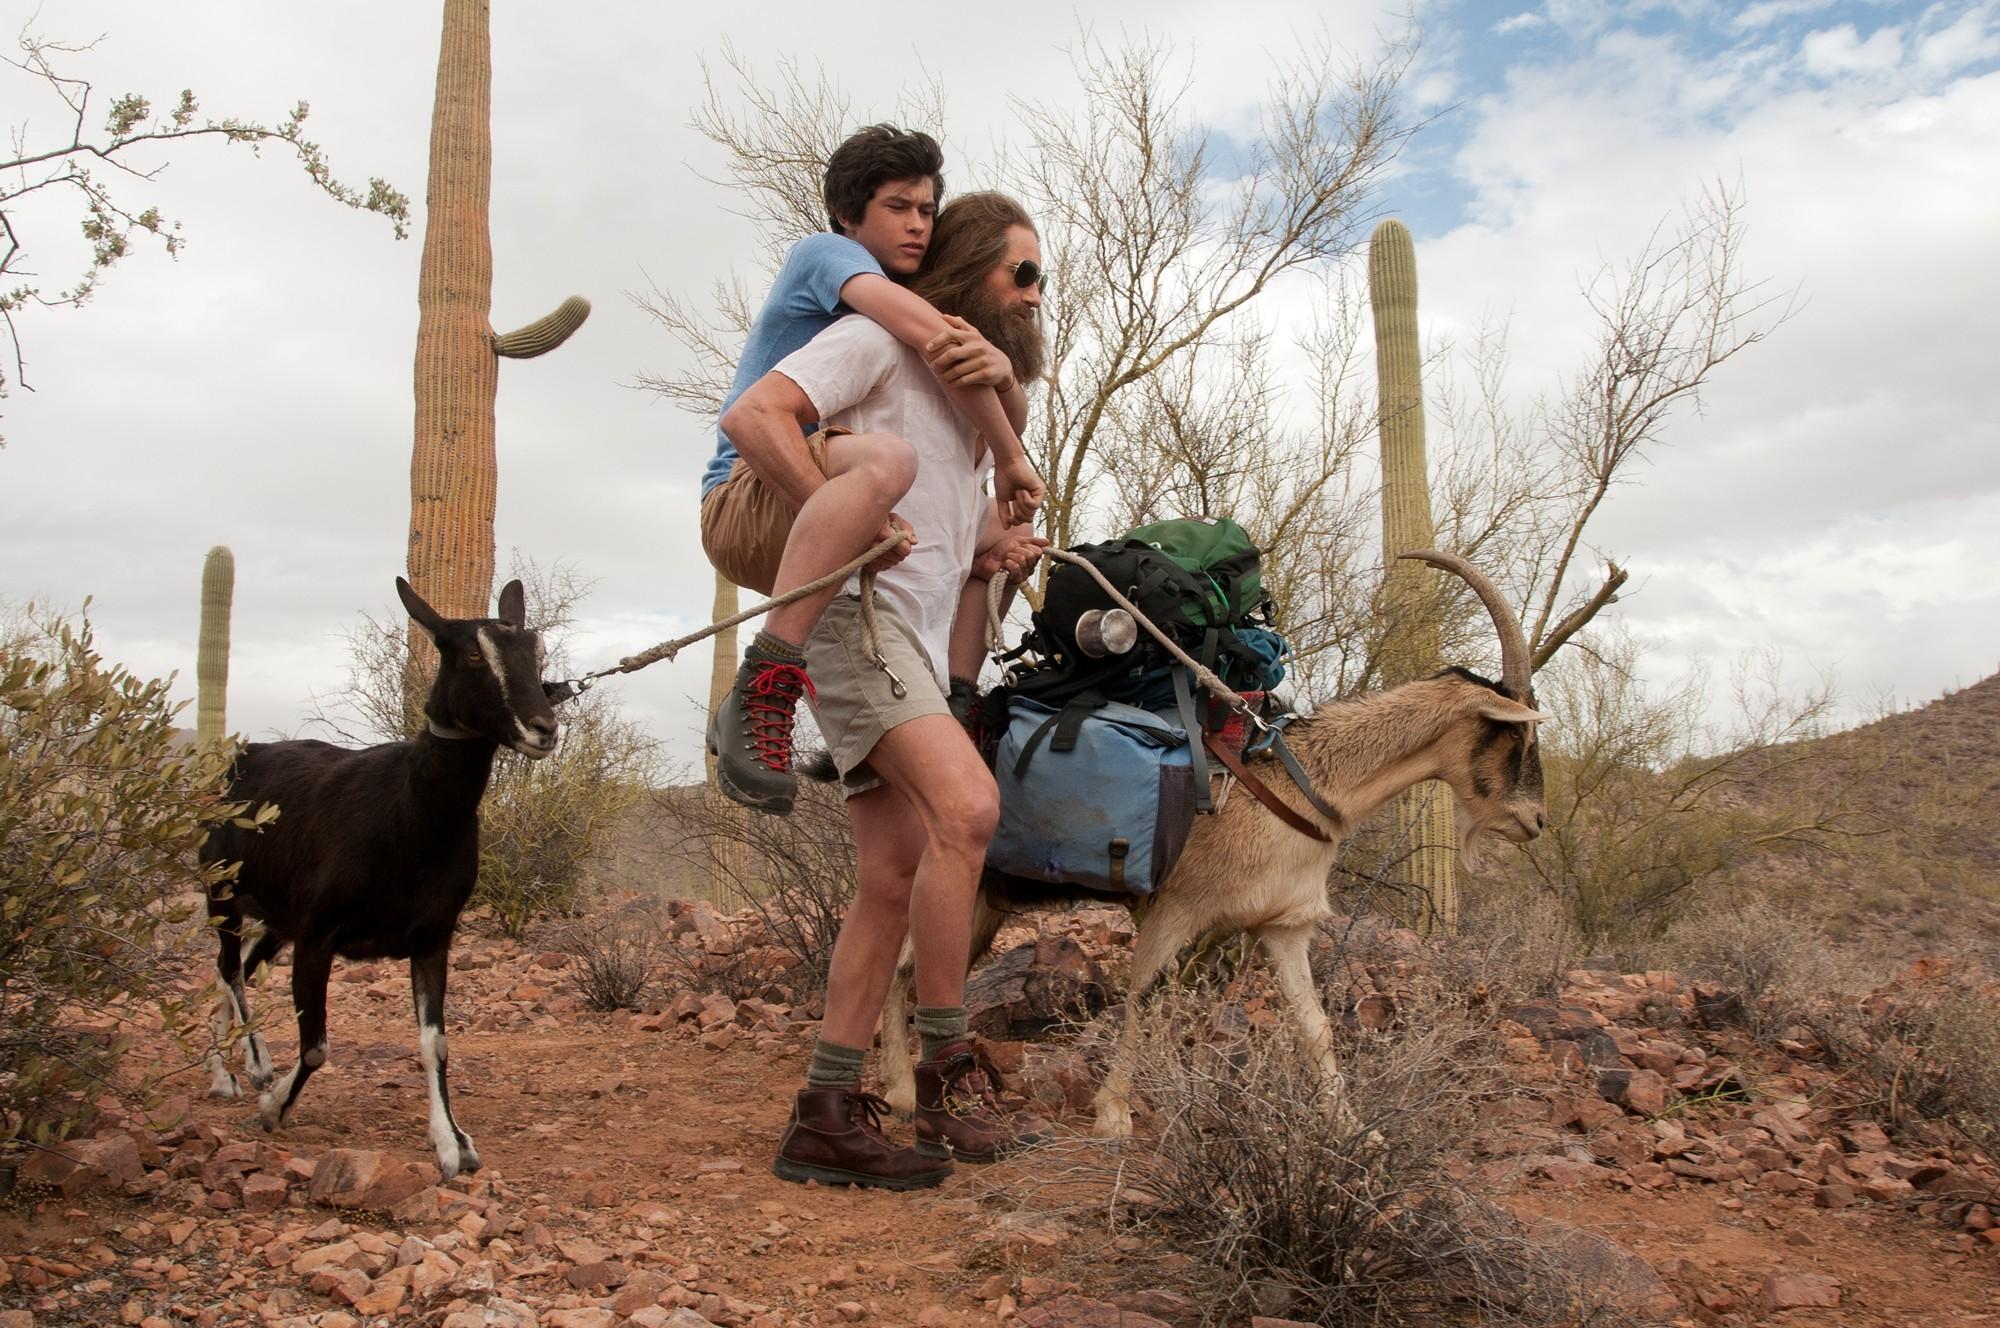 Graham Phillips stars as Ellis and David Duchovny stars as Goat Man in Image Entertainment's Goats (2012)